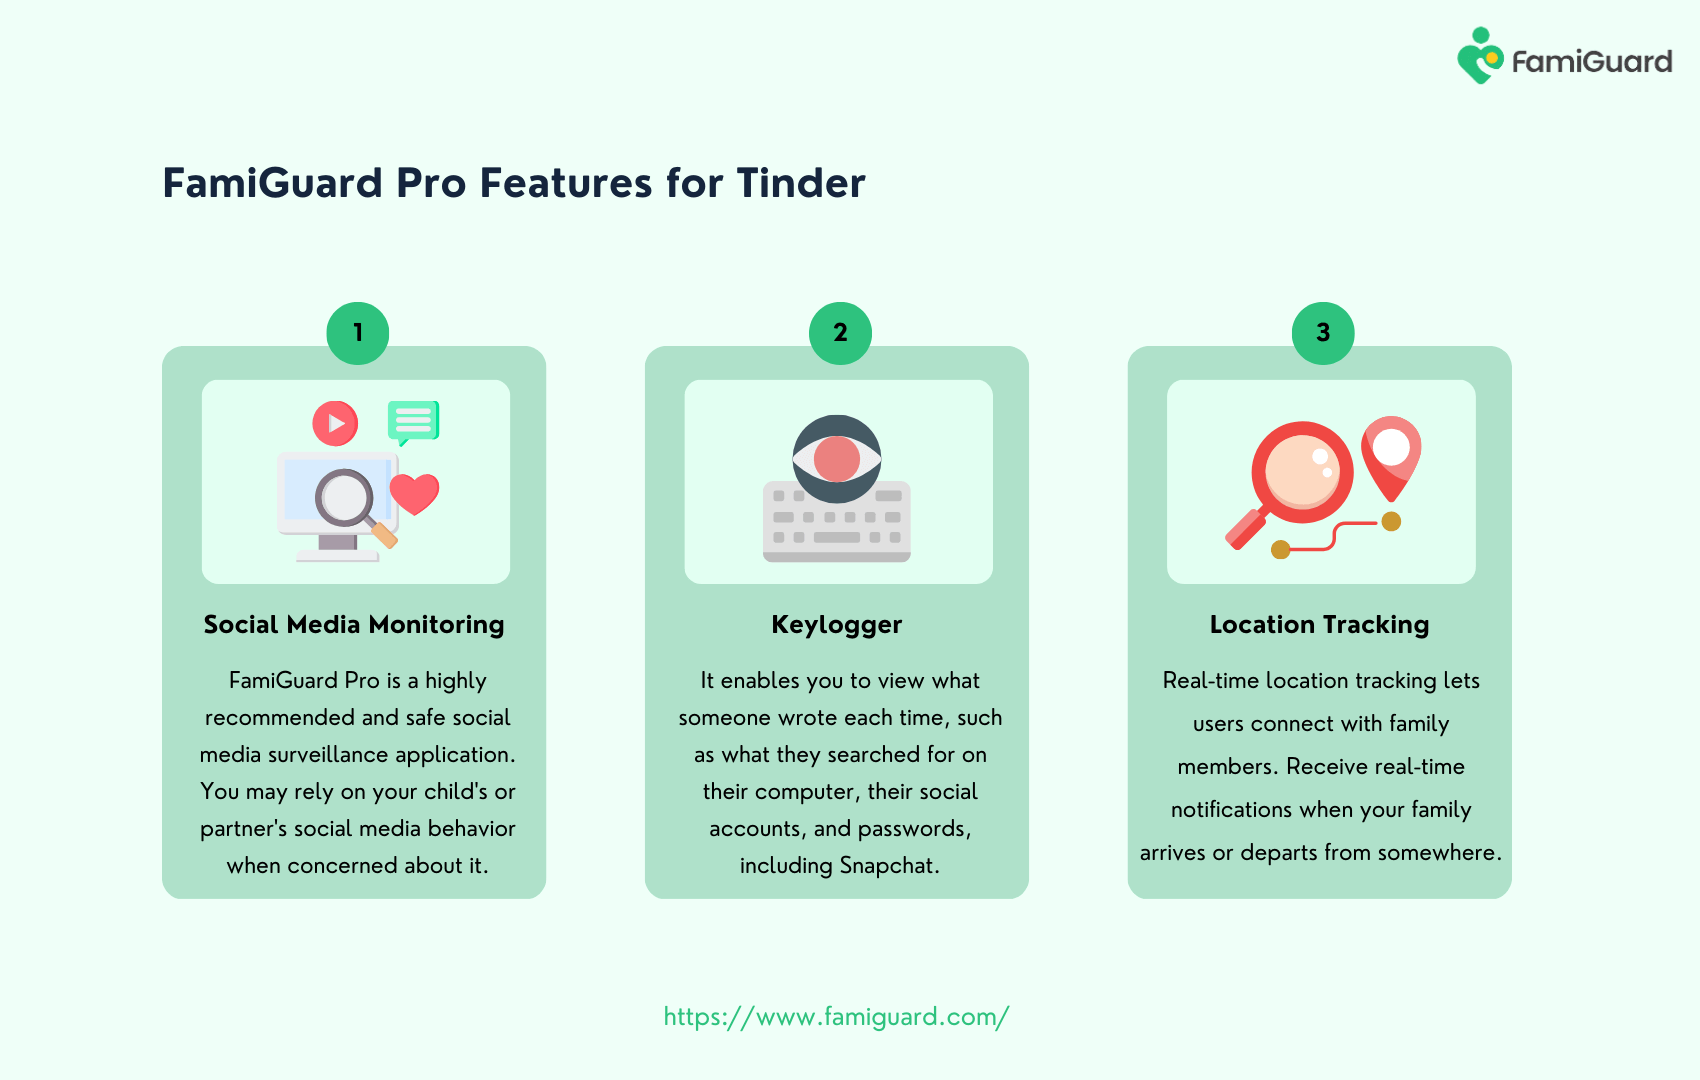 FamiGuard Pro Features for Tinder